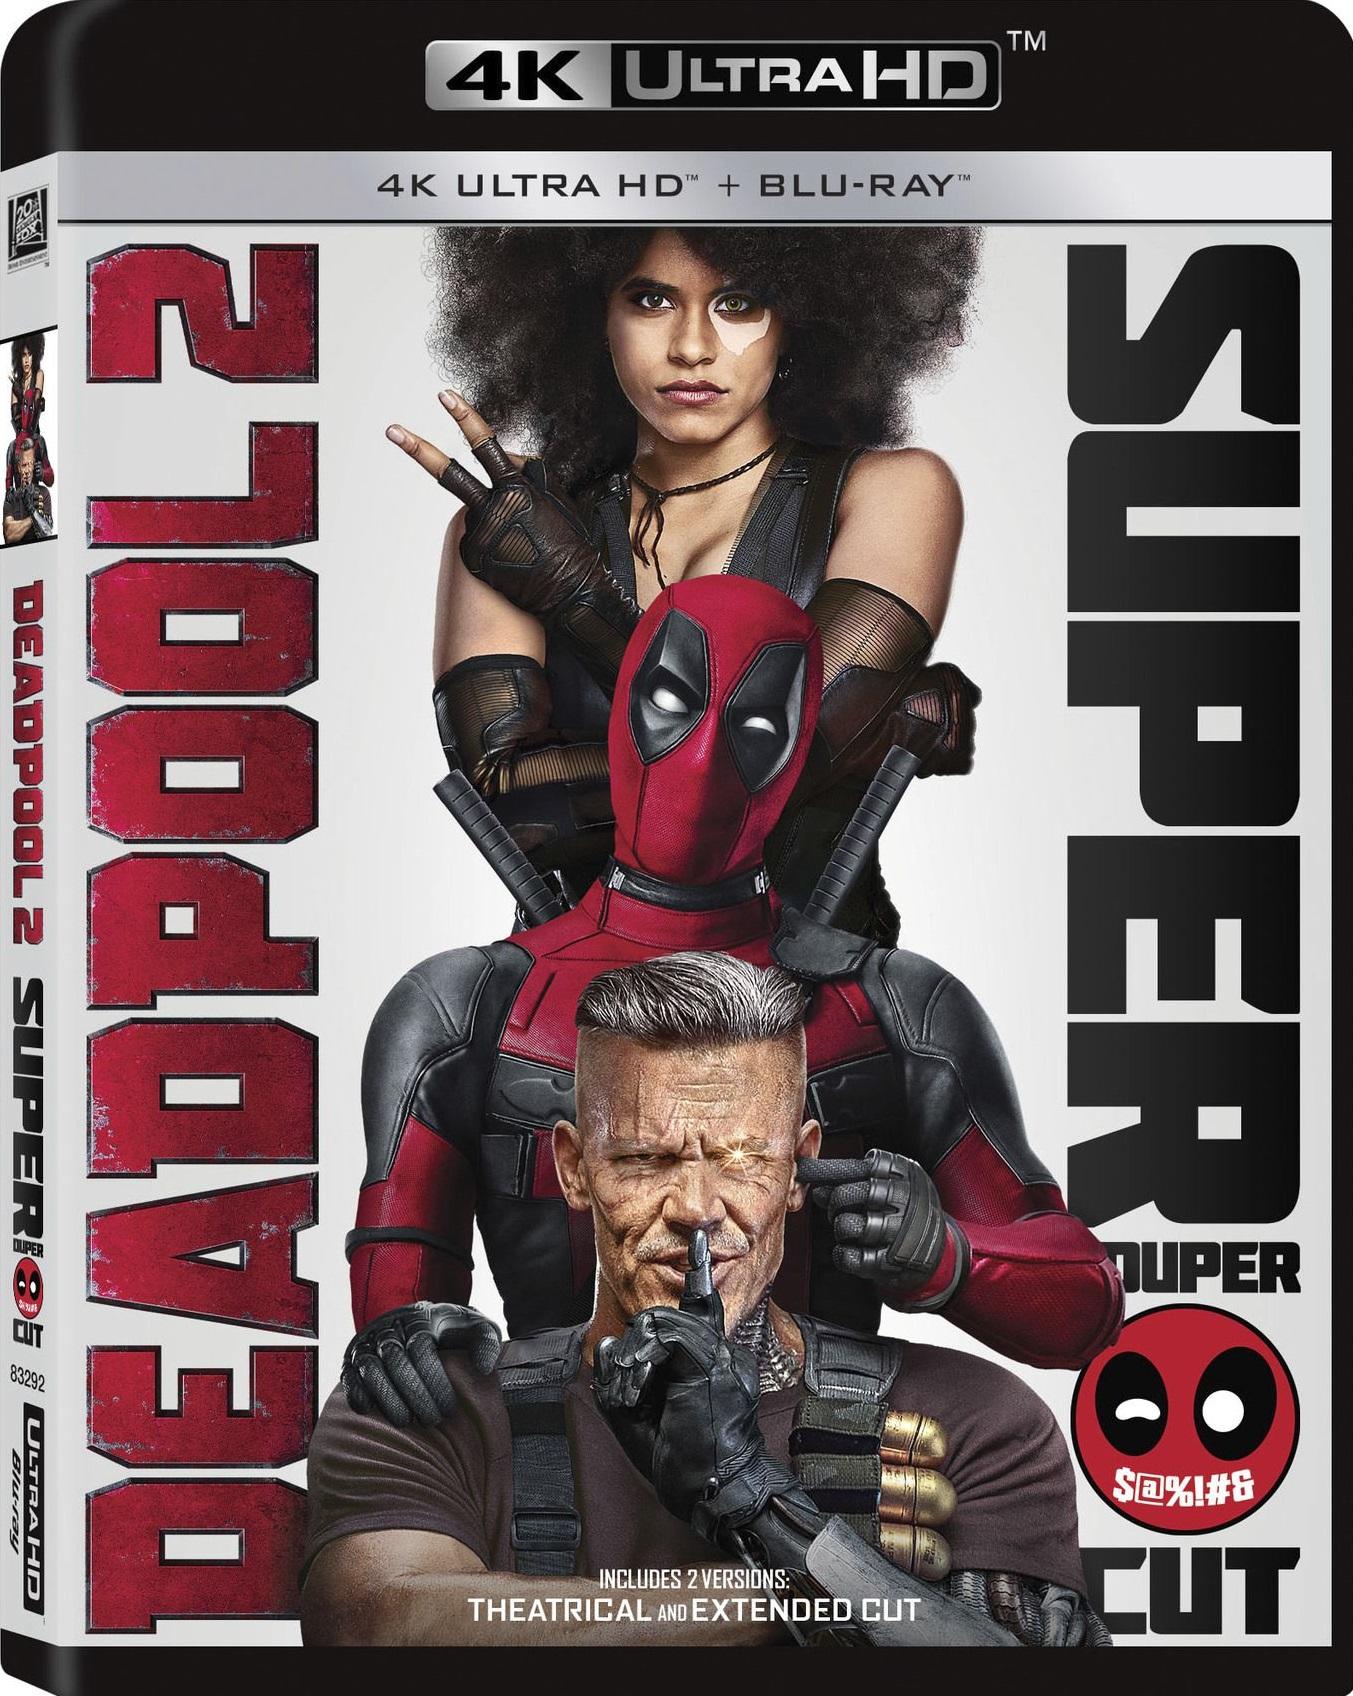 The Deadpool 2 Blu-ray Has Way More Than Just An Extended Cut